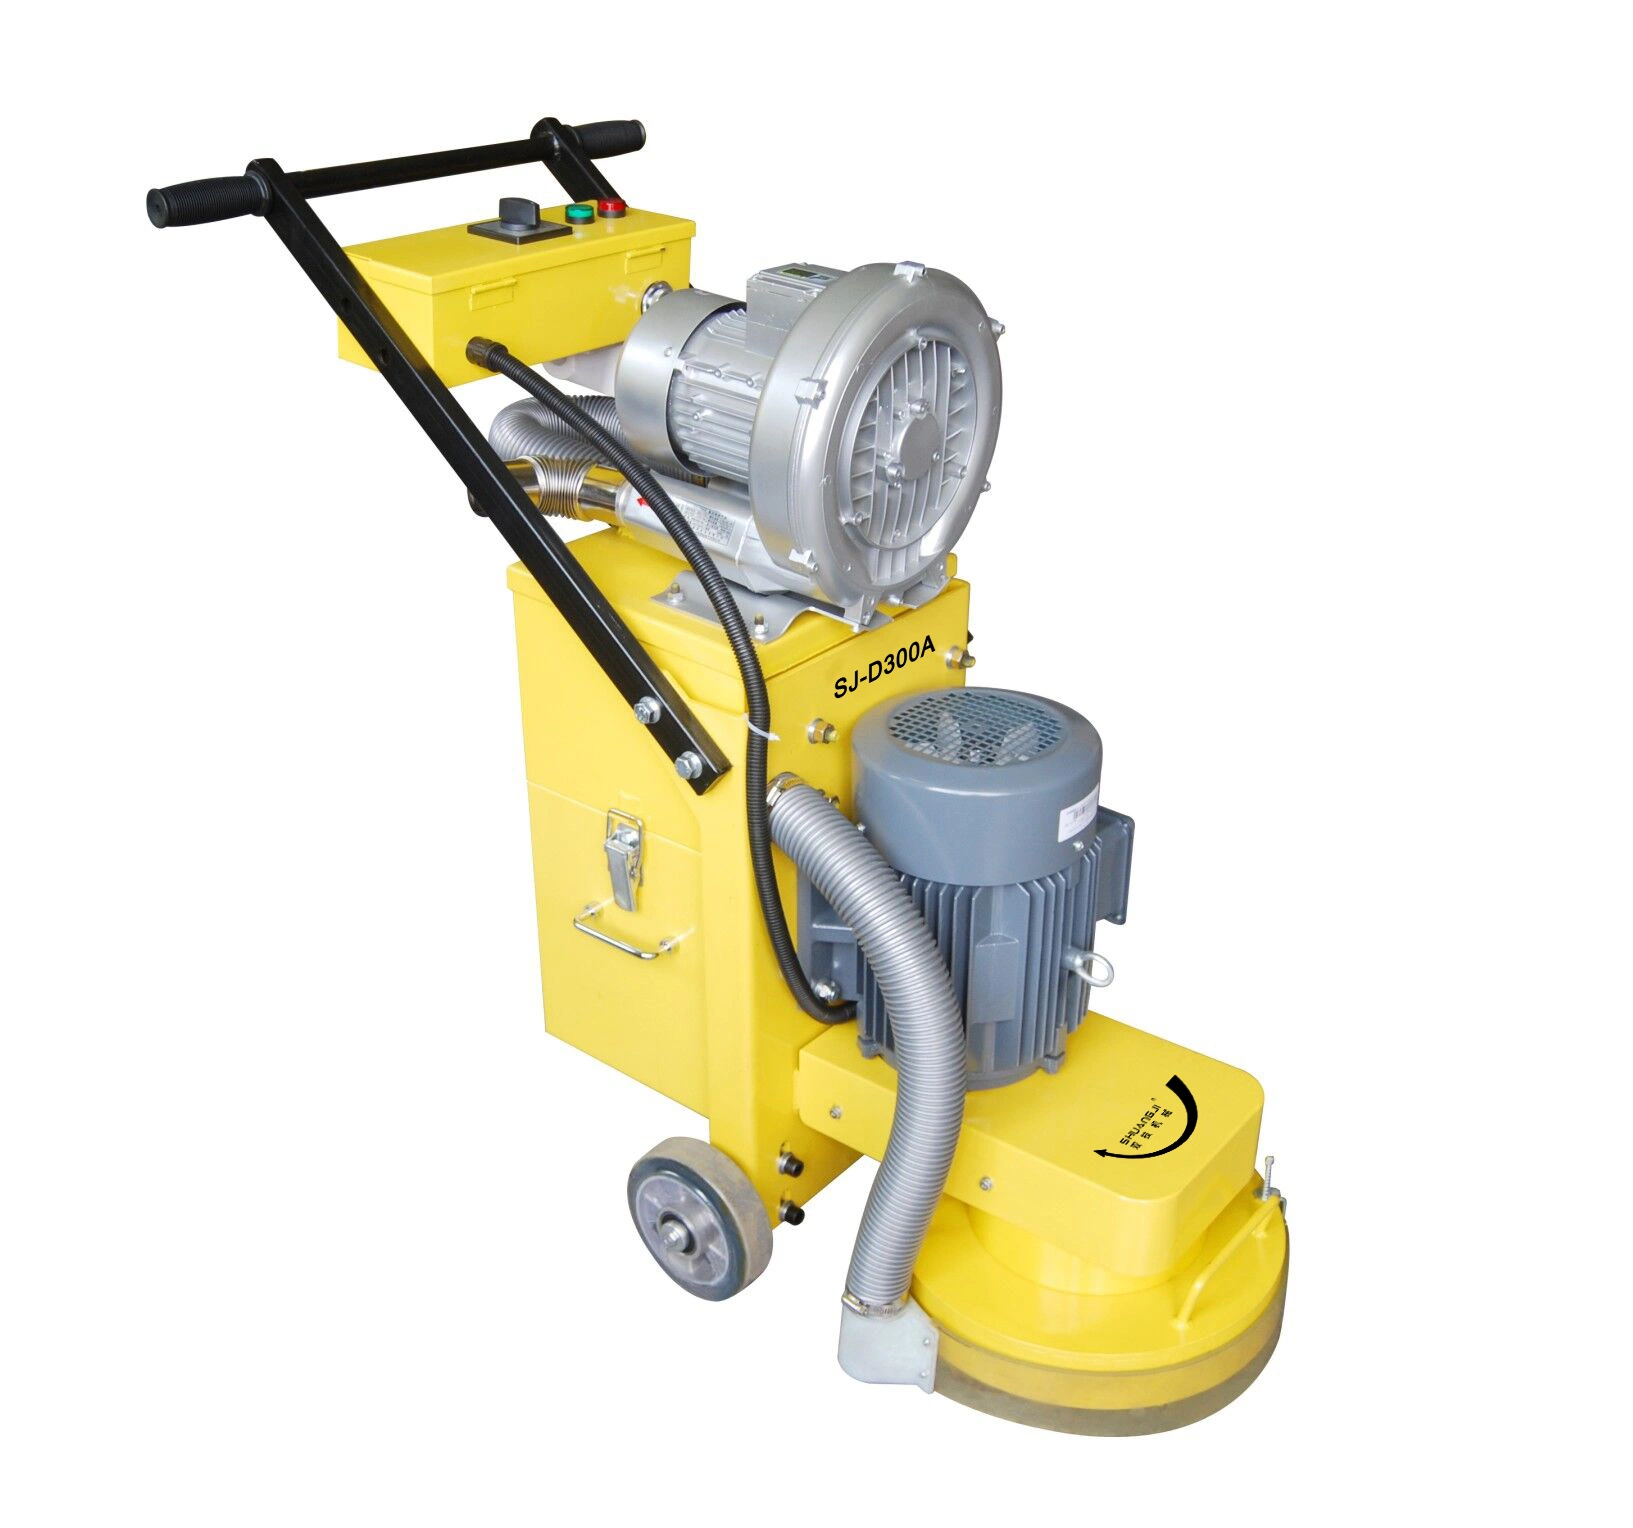 Factory Price Stone Concrete Floor Grinding Polishing Machine for Sale